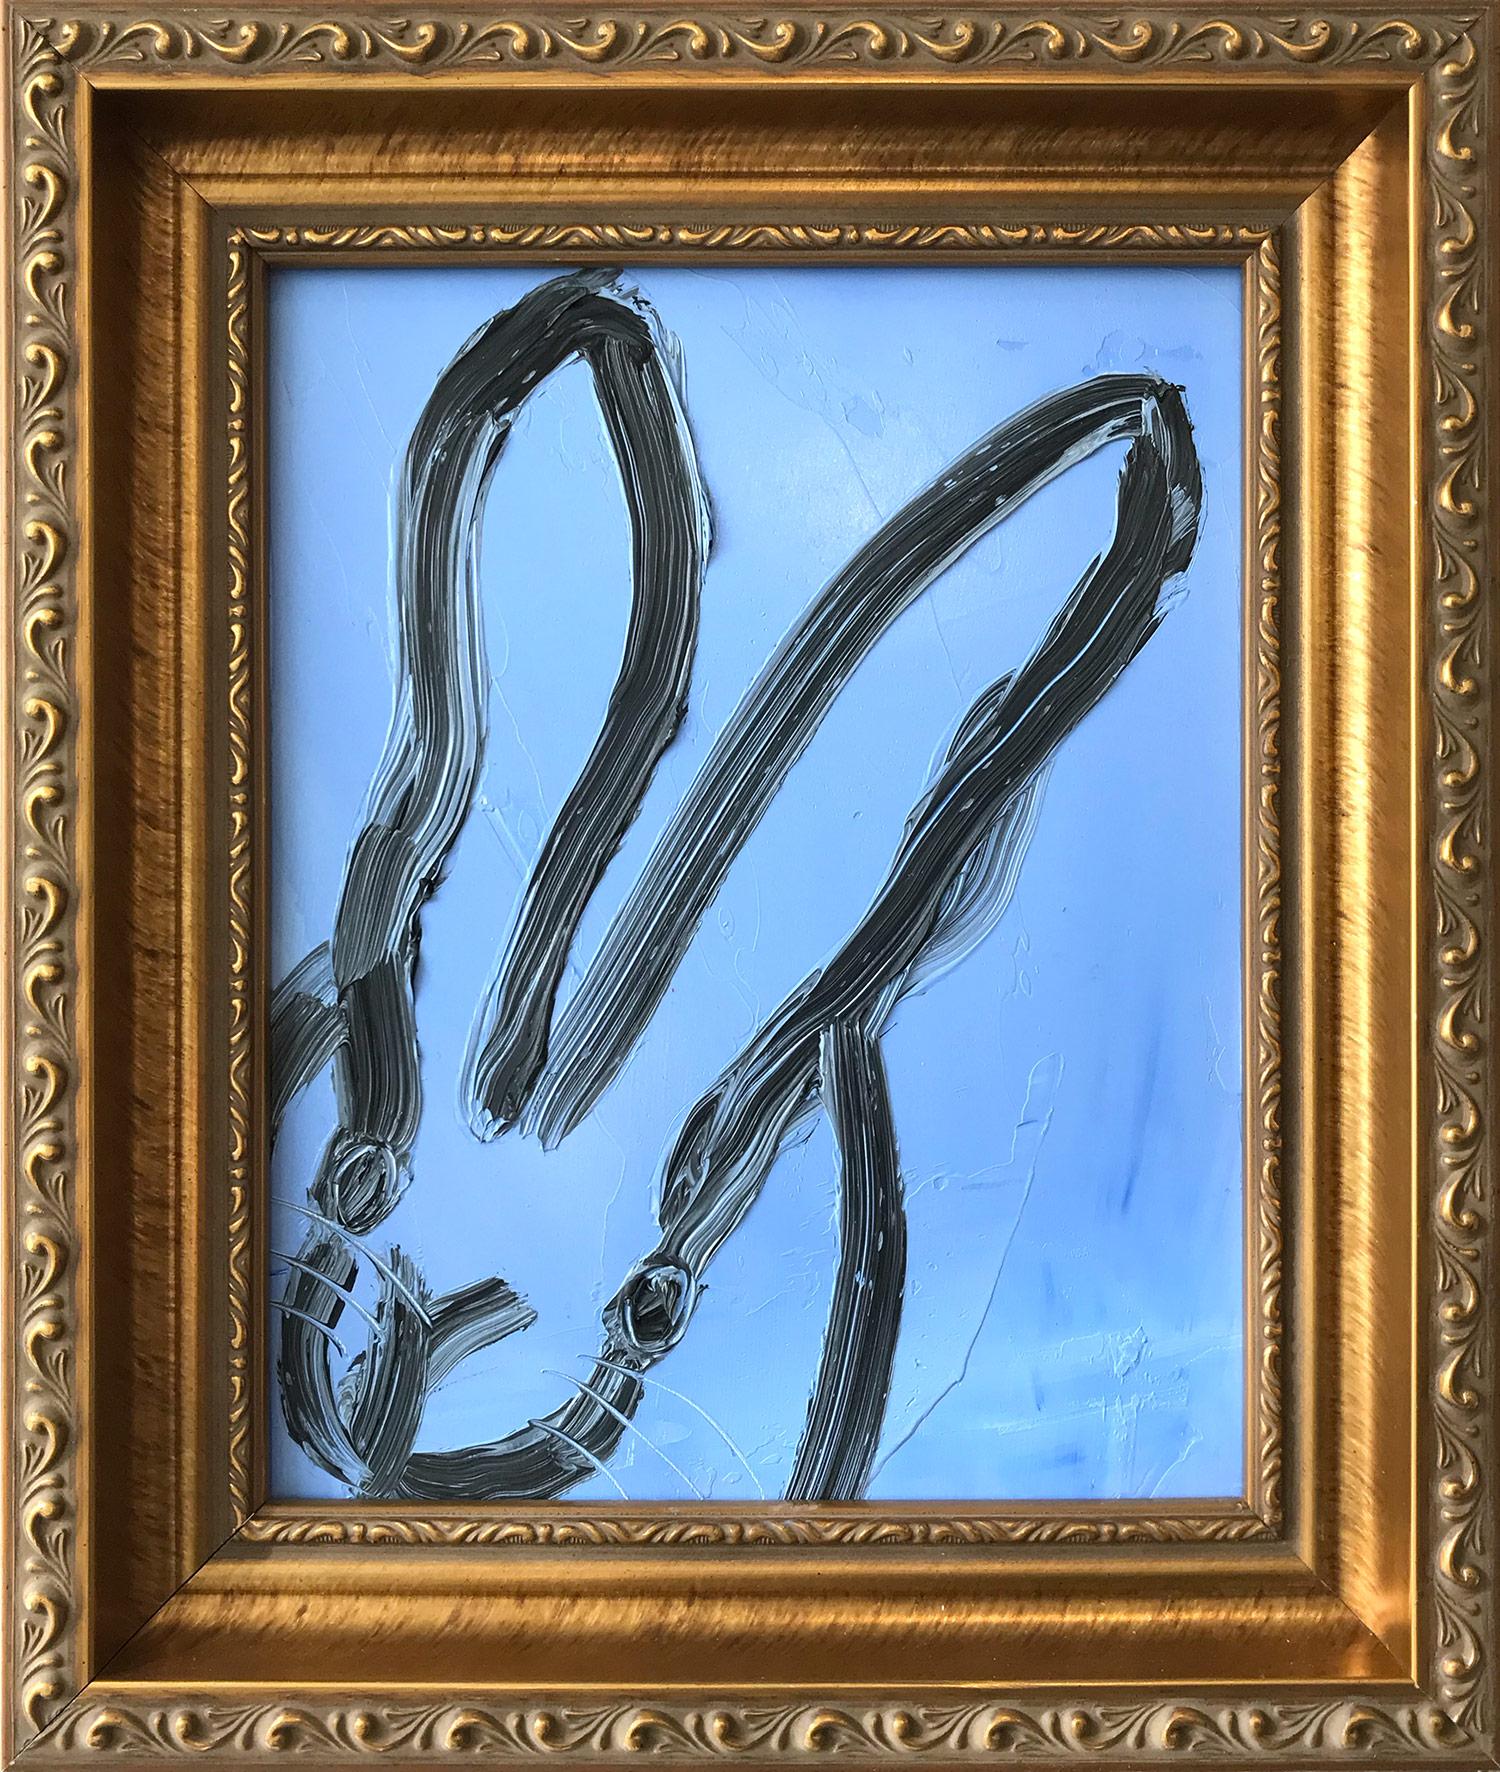 Hunt Slonem Animal Painting - "Jules" (Black Outlined Bunny on Blue Background Oil Painting on Wood Panel)